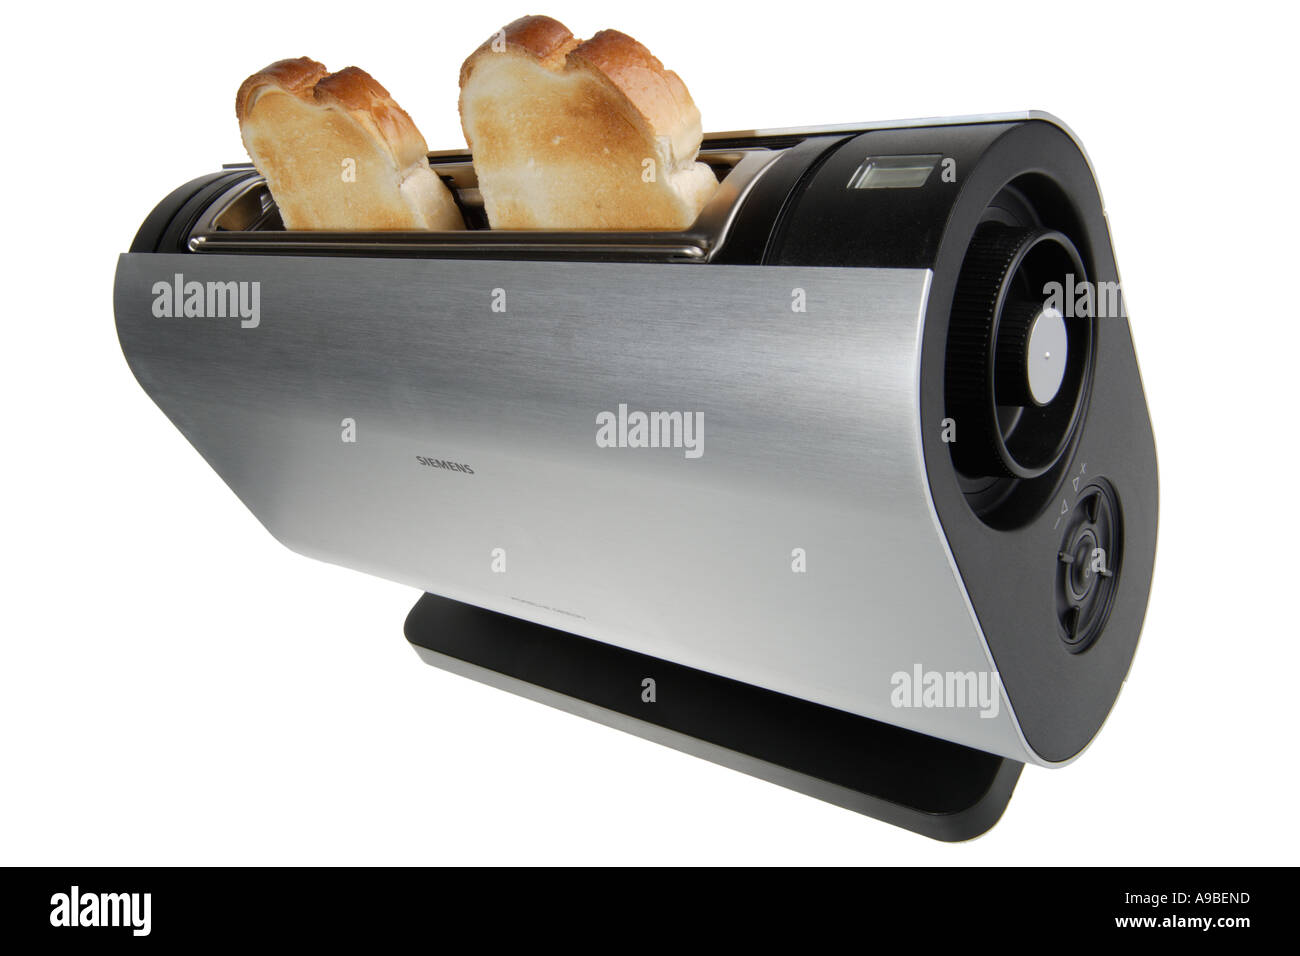 Porsche designed Siemens toaster and two slices of toast Stock Photo - Alamy